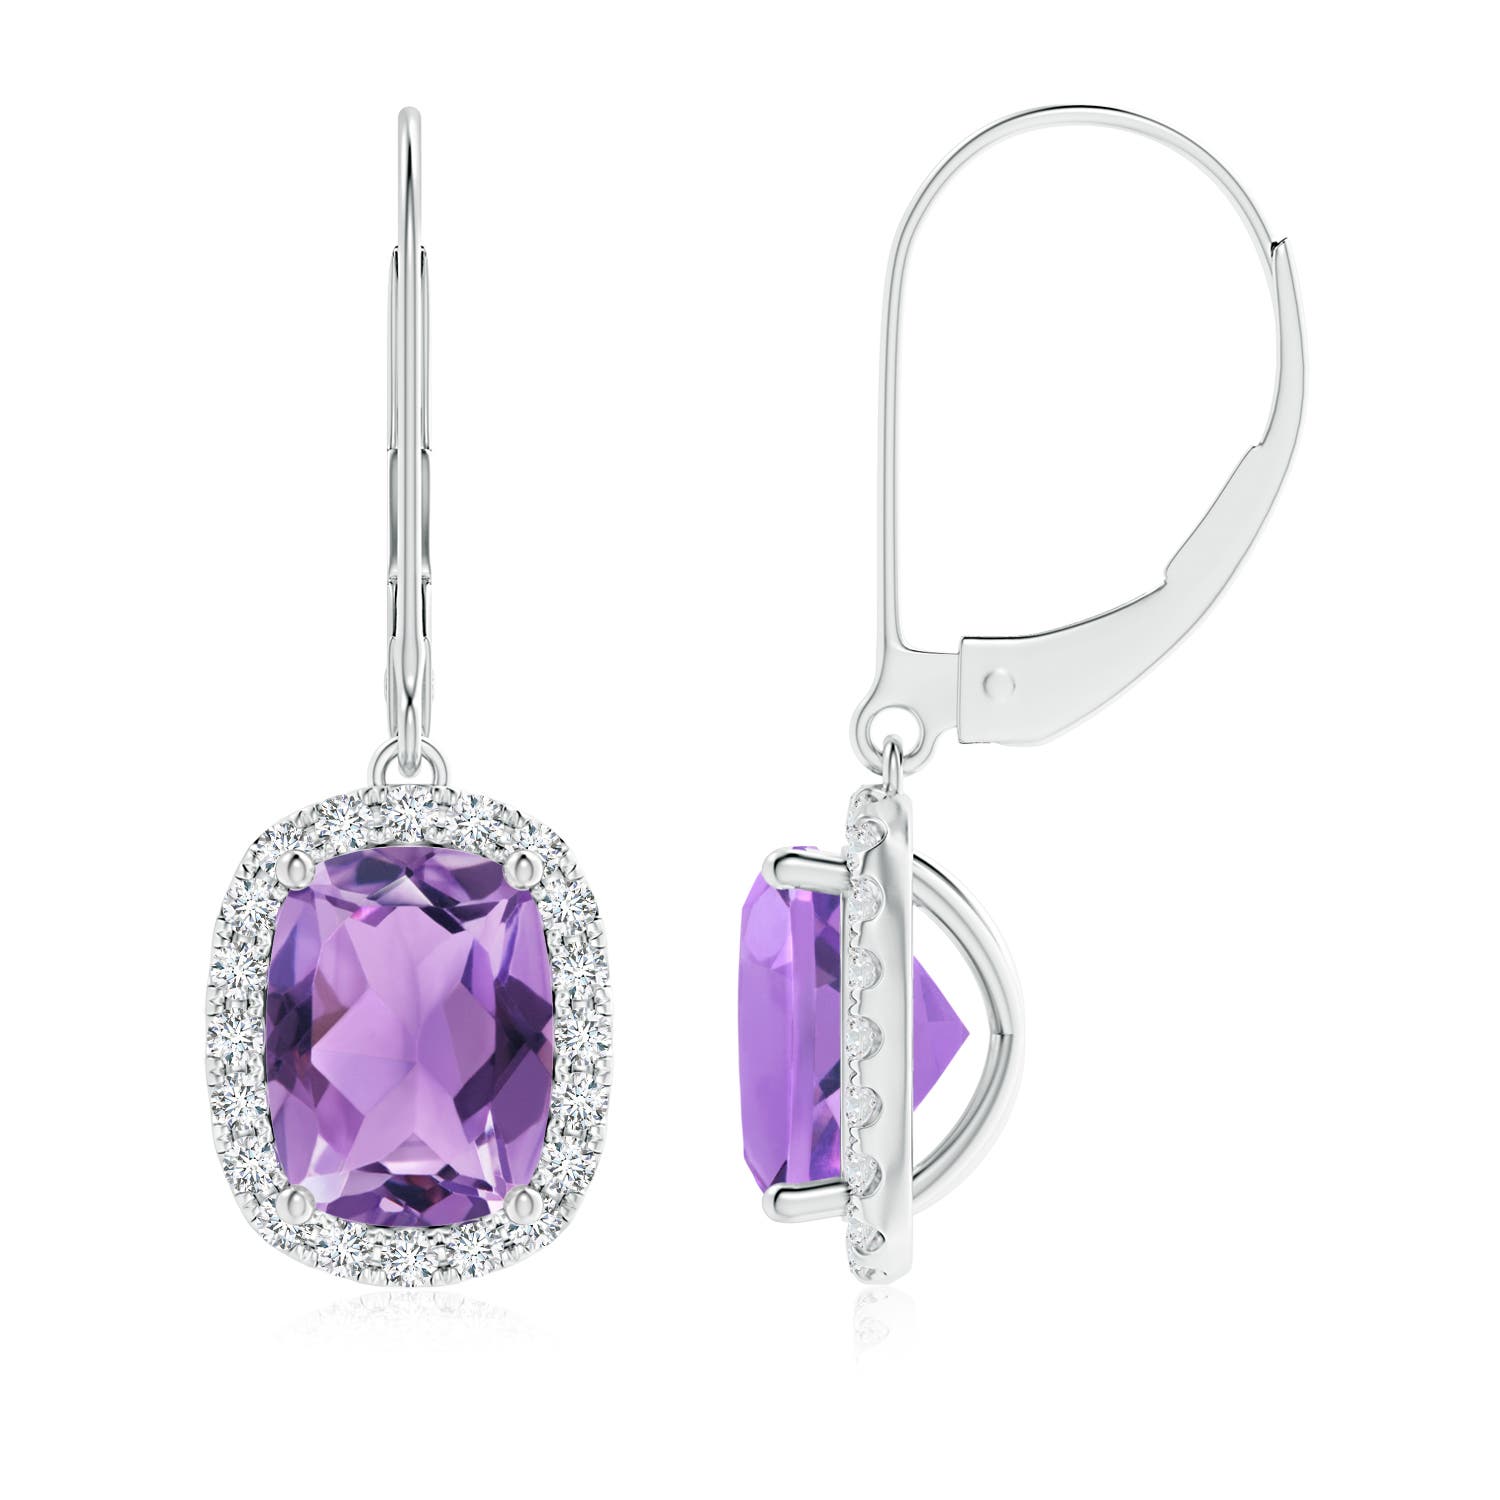 A - Amethyst / 2.72 CT / 14 KT White Gold